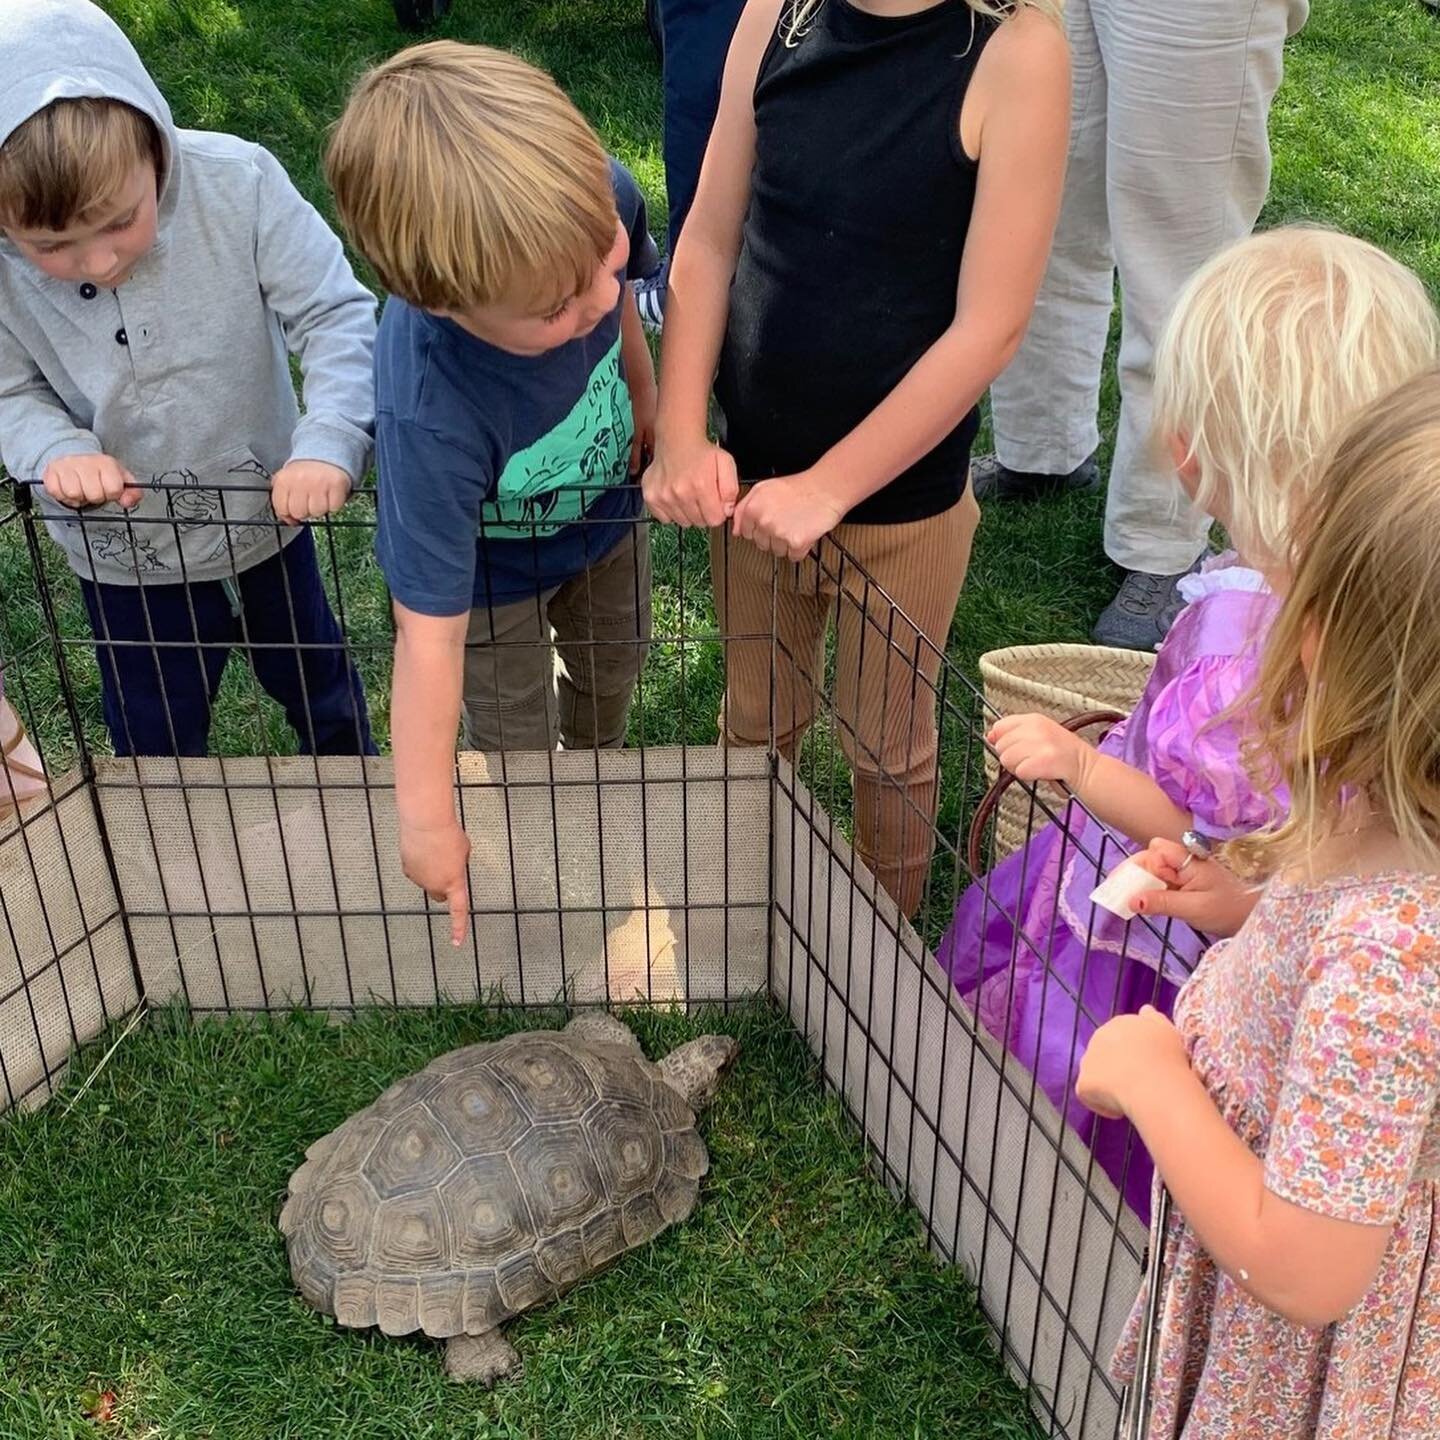 Throwback to a few weeks ago where two of our social education ambassador Burmese Black Mountain tortoises (Manouria emys phayrei) got to shell-ebrate #EarthDay with the community! A big part of our mission includes attending outreach events like the